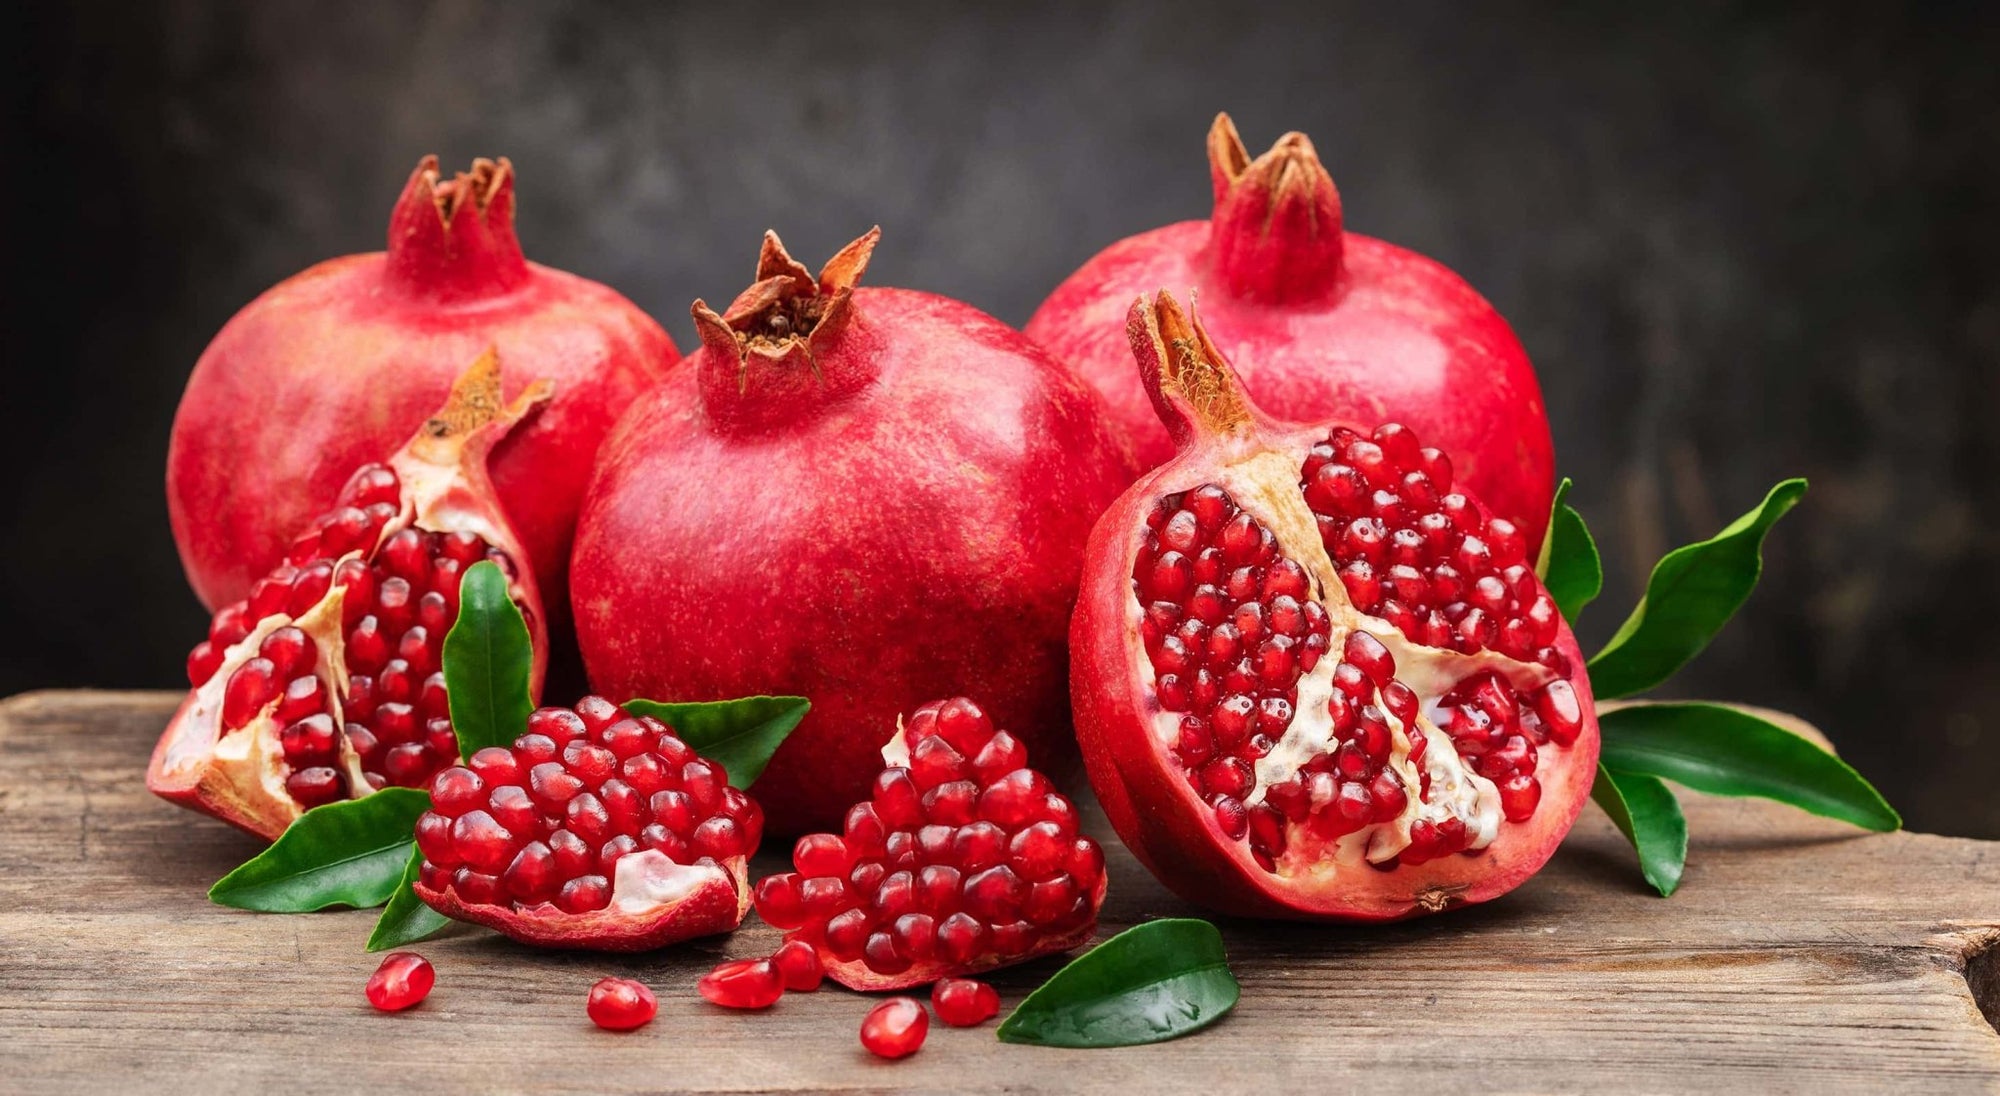 5 Health Benefits of Pomegranate & Why You Should Eat Them - 120/Life